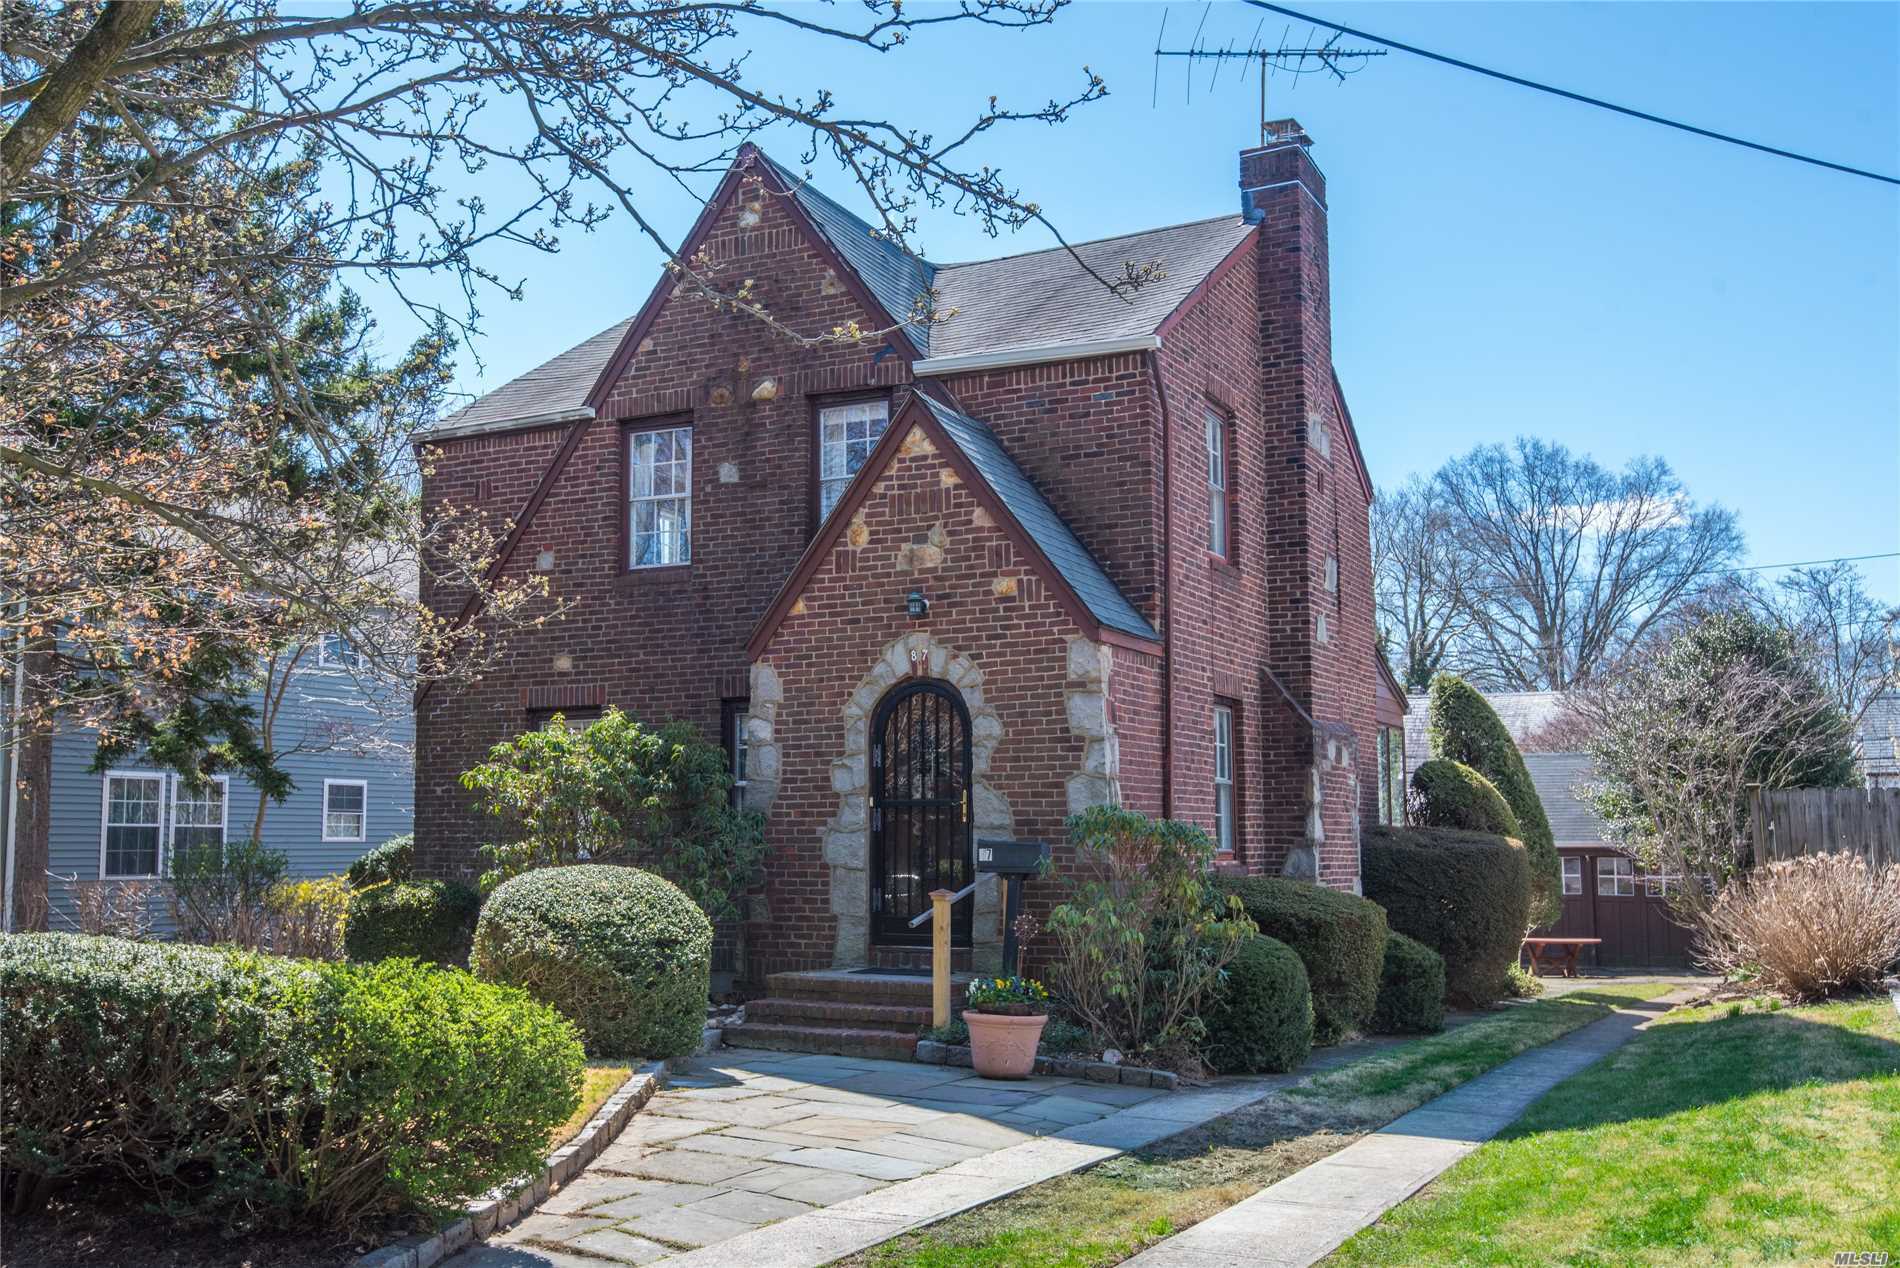 Add Your Special Touch To This Classic Brick Tudor In Desirable Estate Section With A Beautiful Secluded Back Yard.Formal Living Room With Brick Fireplace. Formal Dining Room, Eat In Kitchen 3 Bedrooms 1.5 Bath.Overlooking Lovely Gardens And A Detached Garage.